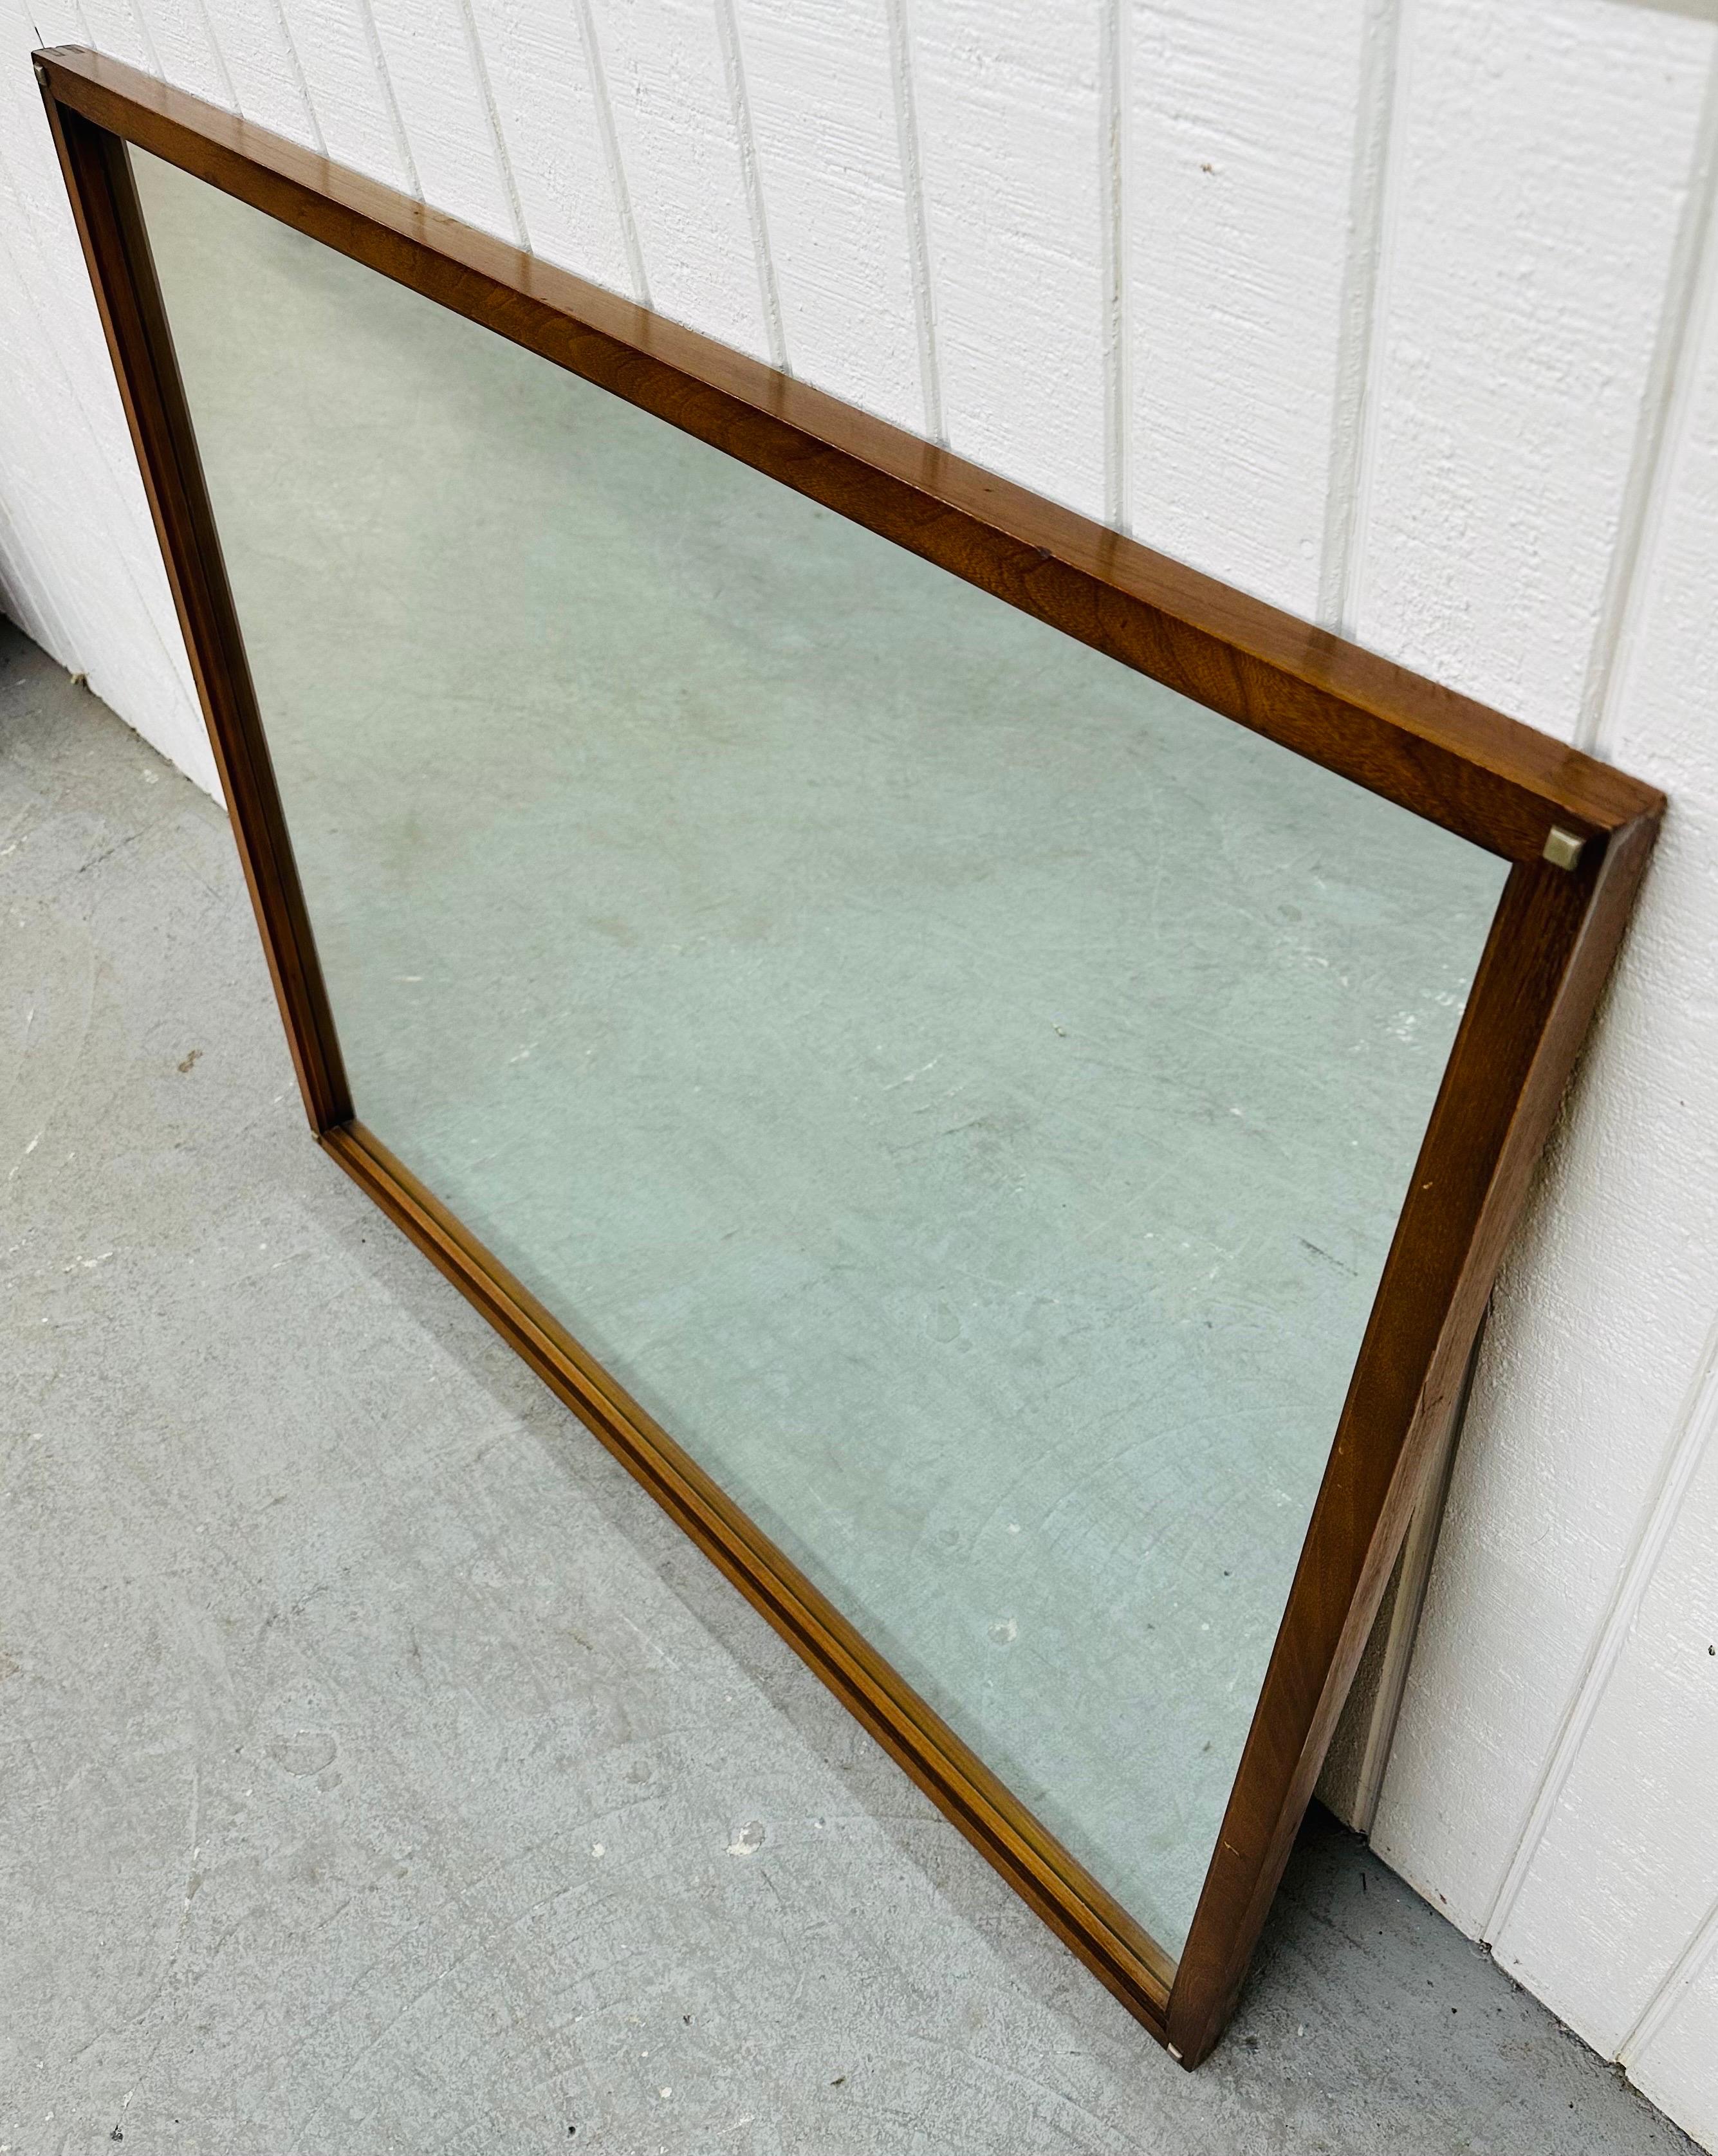 This listing is for a Mid-Century Modern Lane Tuxedo Walnut Mirror. Featuring a straight line design, square nails on each corner, and a beautiful walnut finish. This is an exceptional combination of quality and design by Lane!